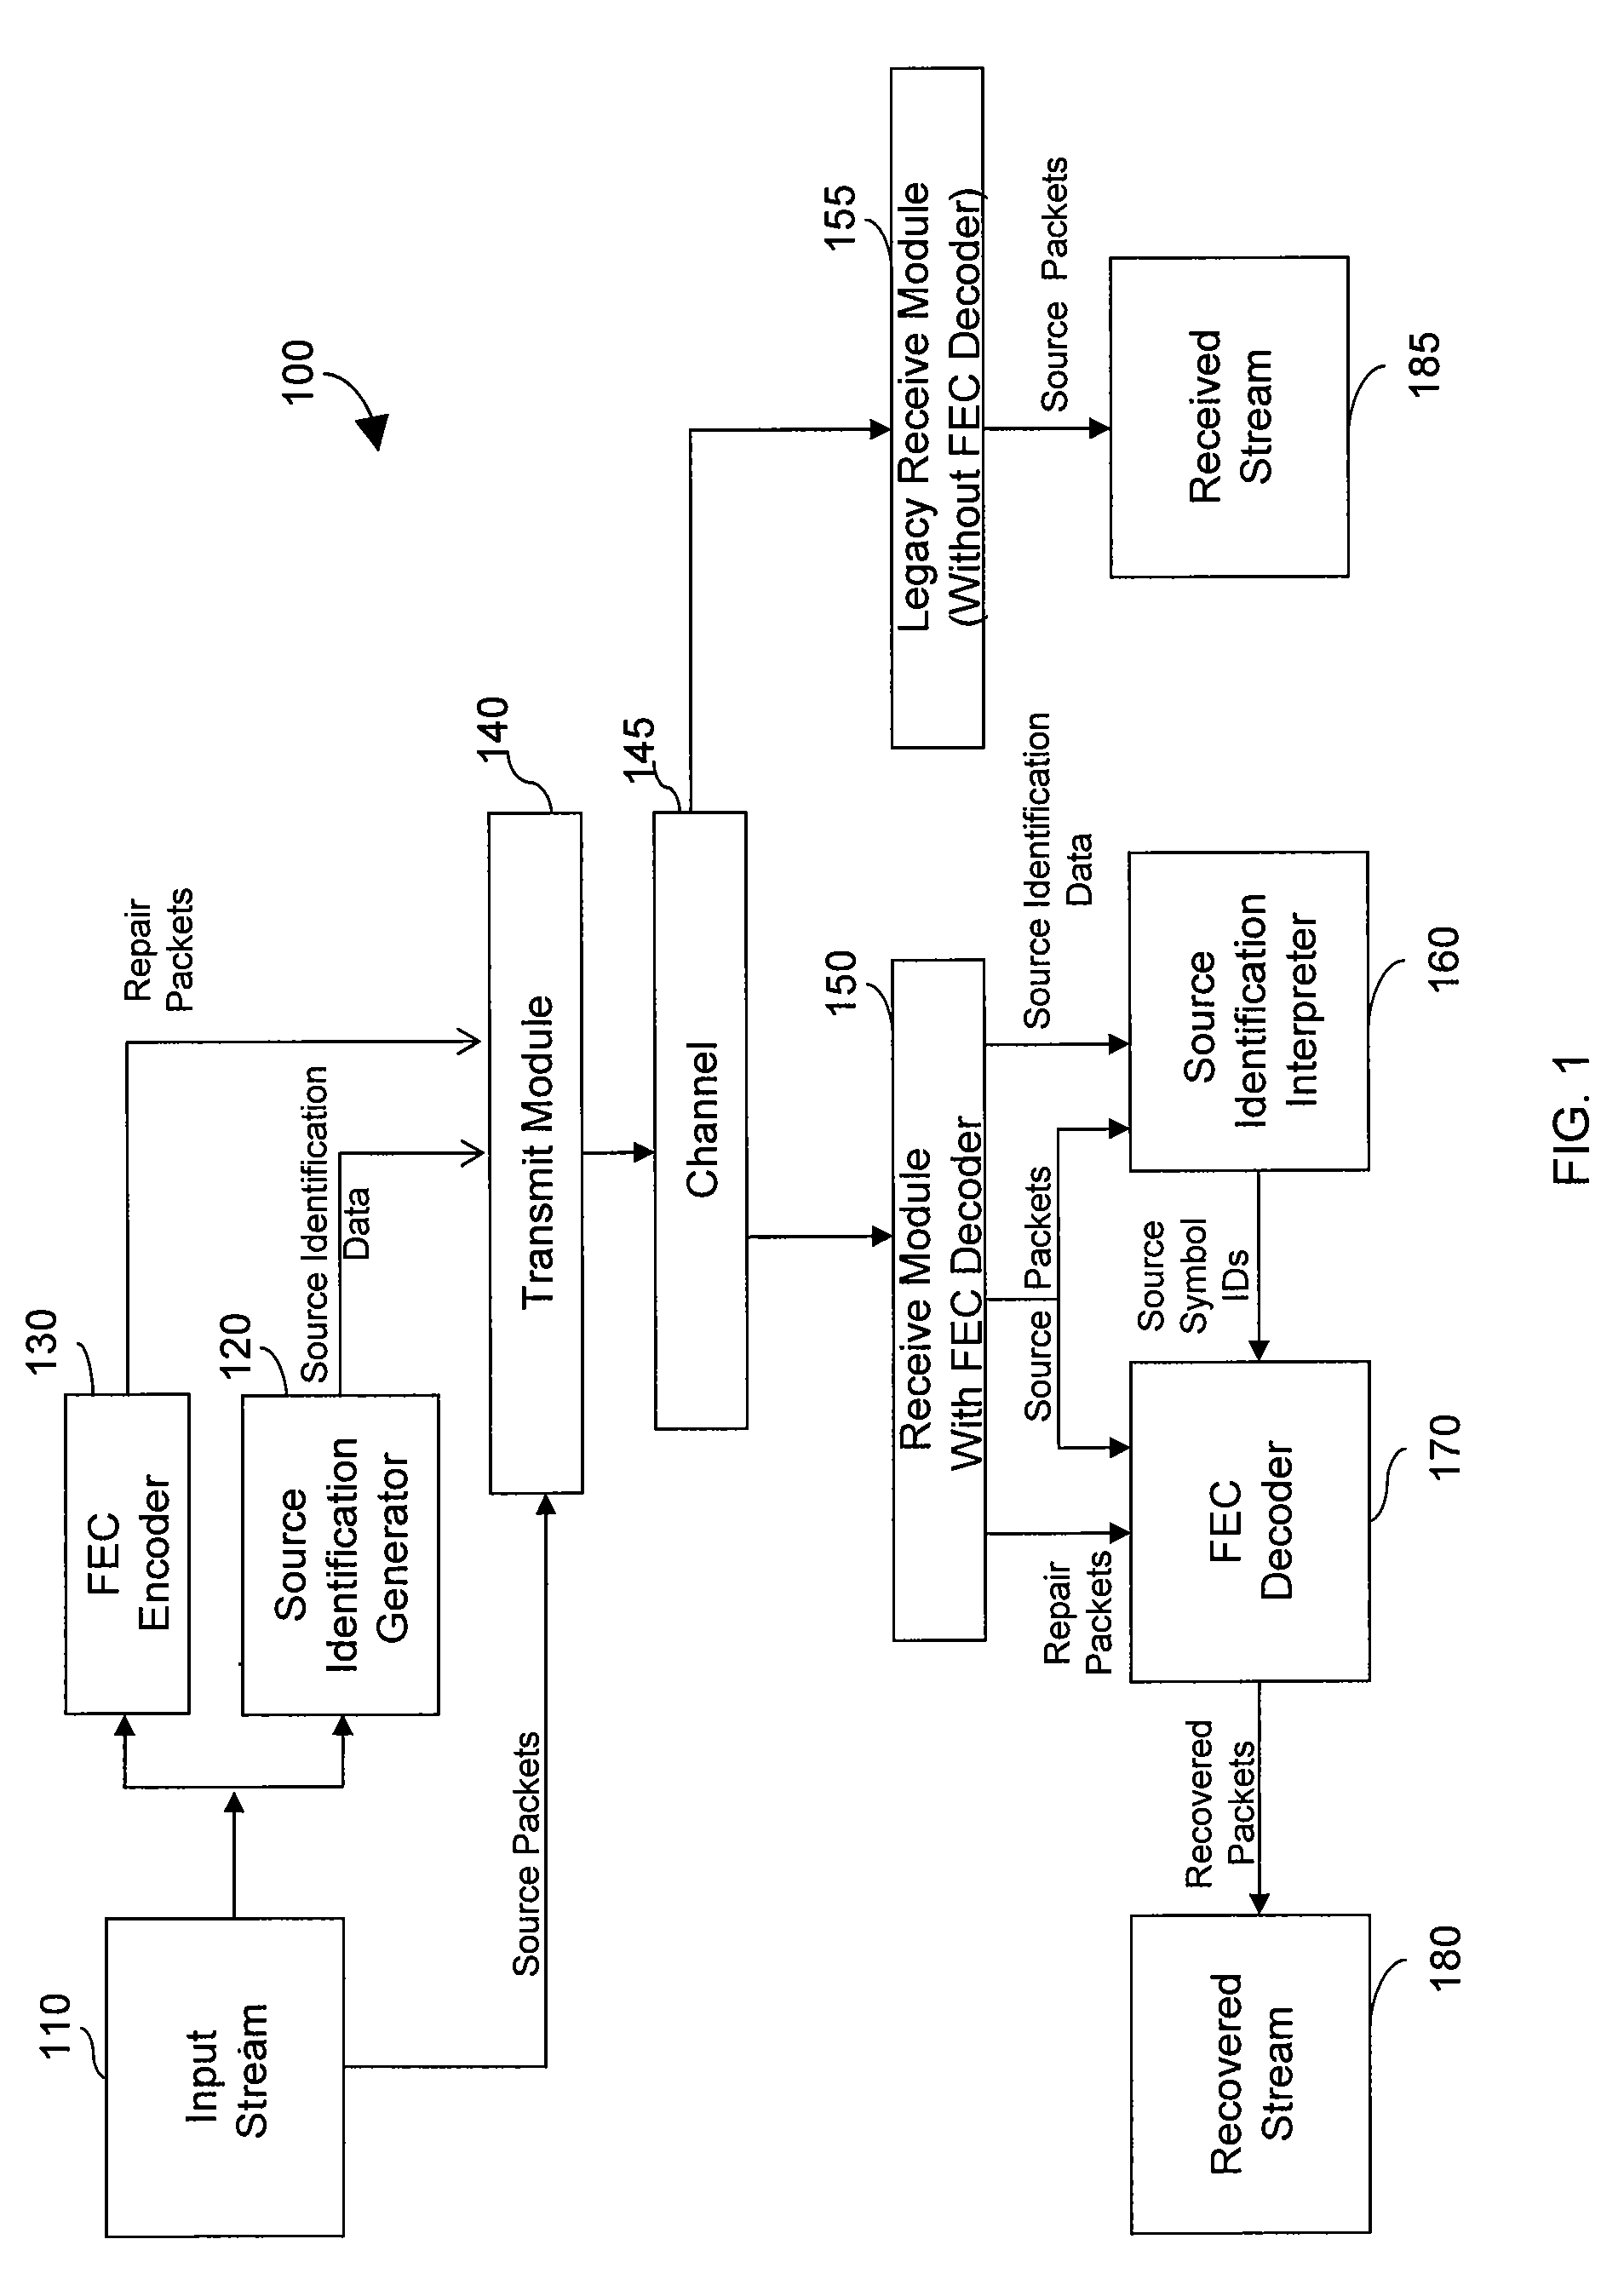 Generating and communicating source identification information to enable reliable communications